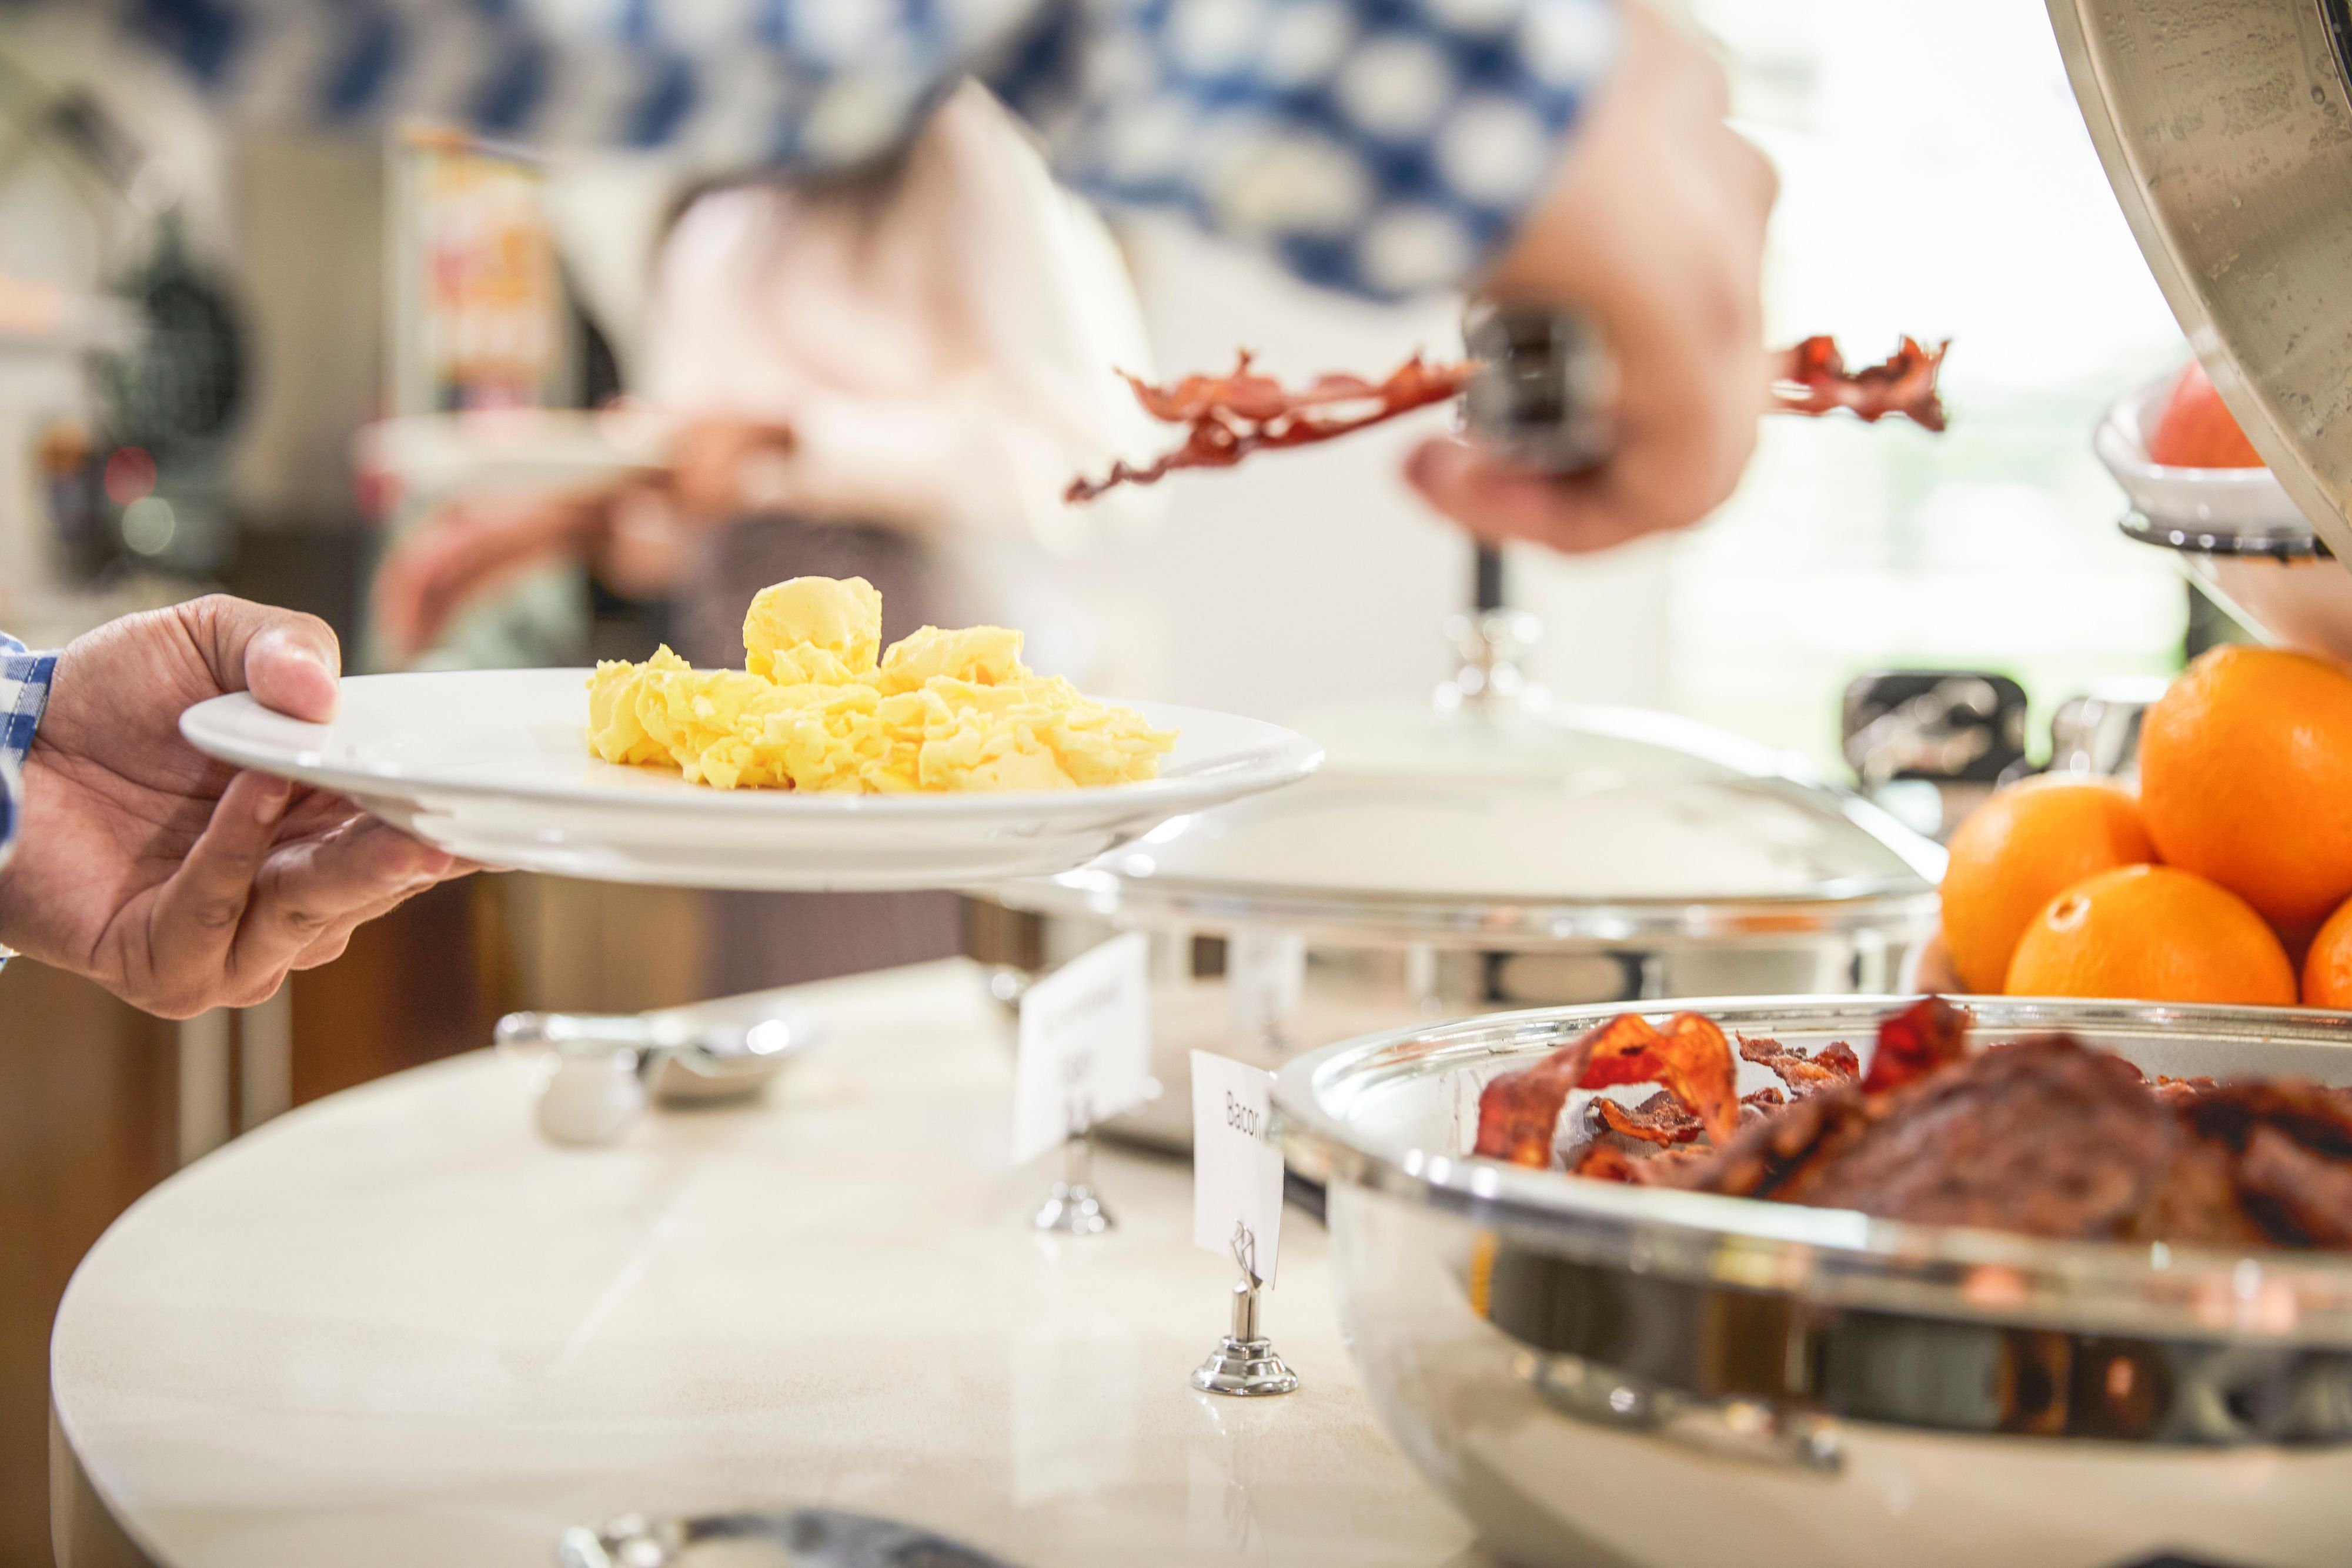  The Staybridge Suites Las Vegas  provides   complimentary full hot breakfast buffet each  morning.  Our  Full Hot breakfast buffet  selections will satisfy everyone.